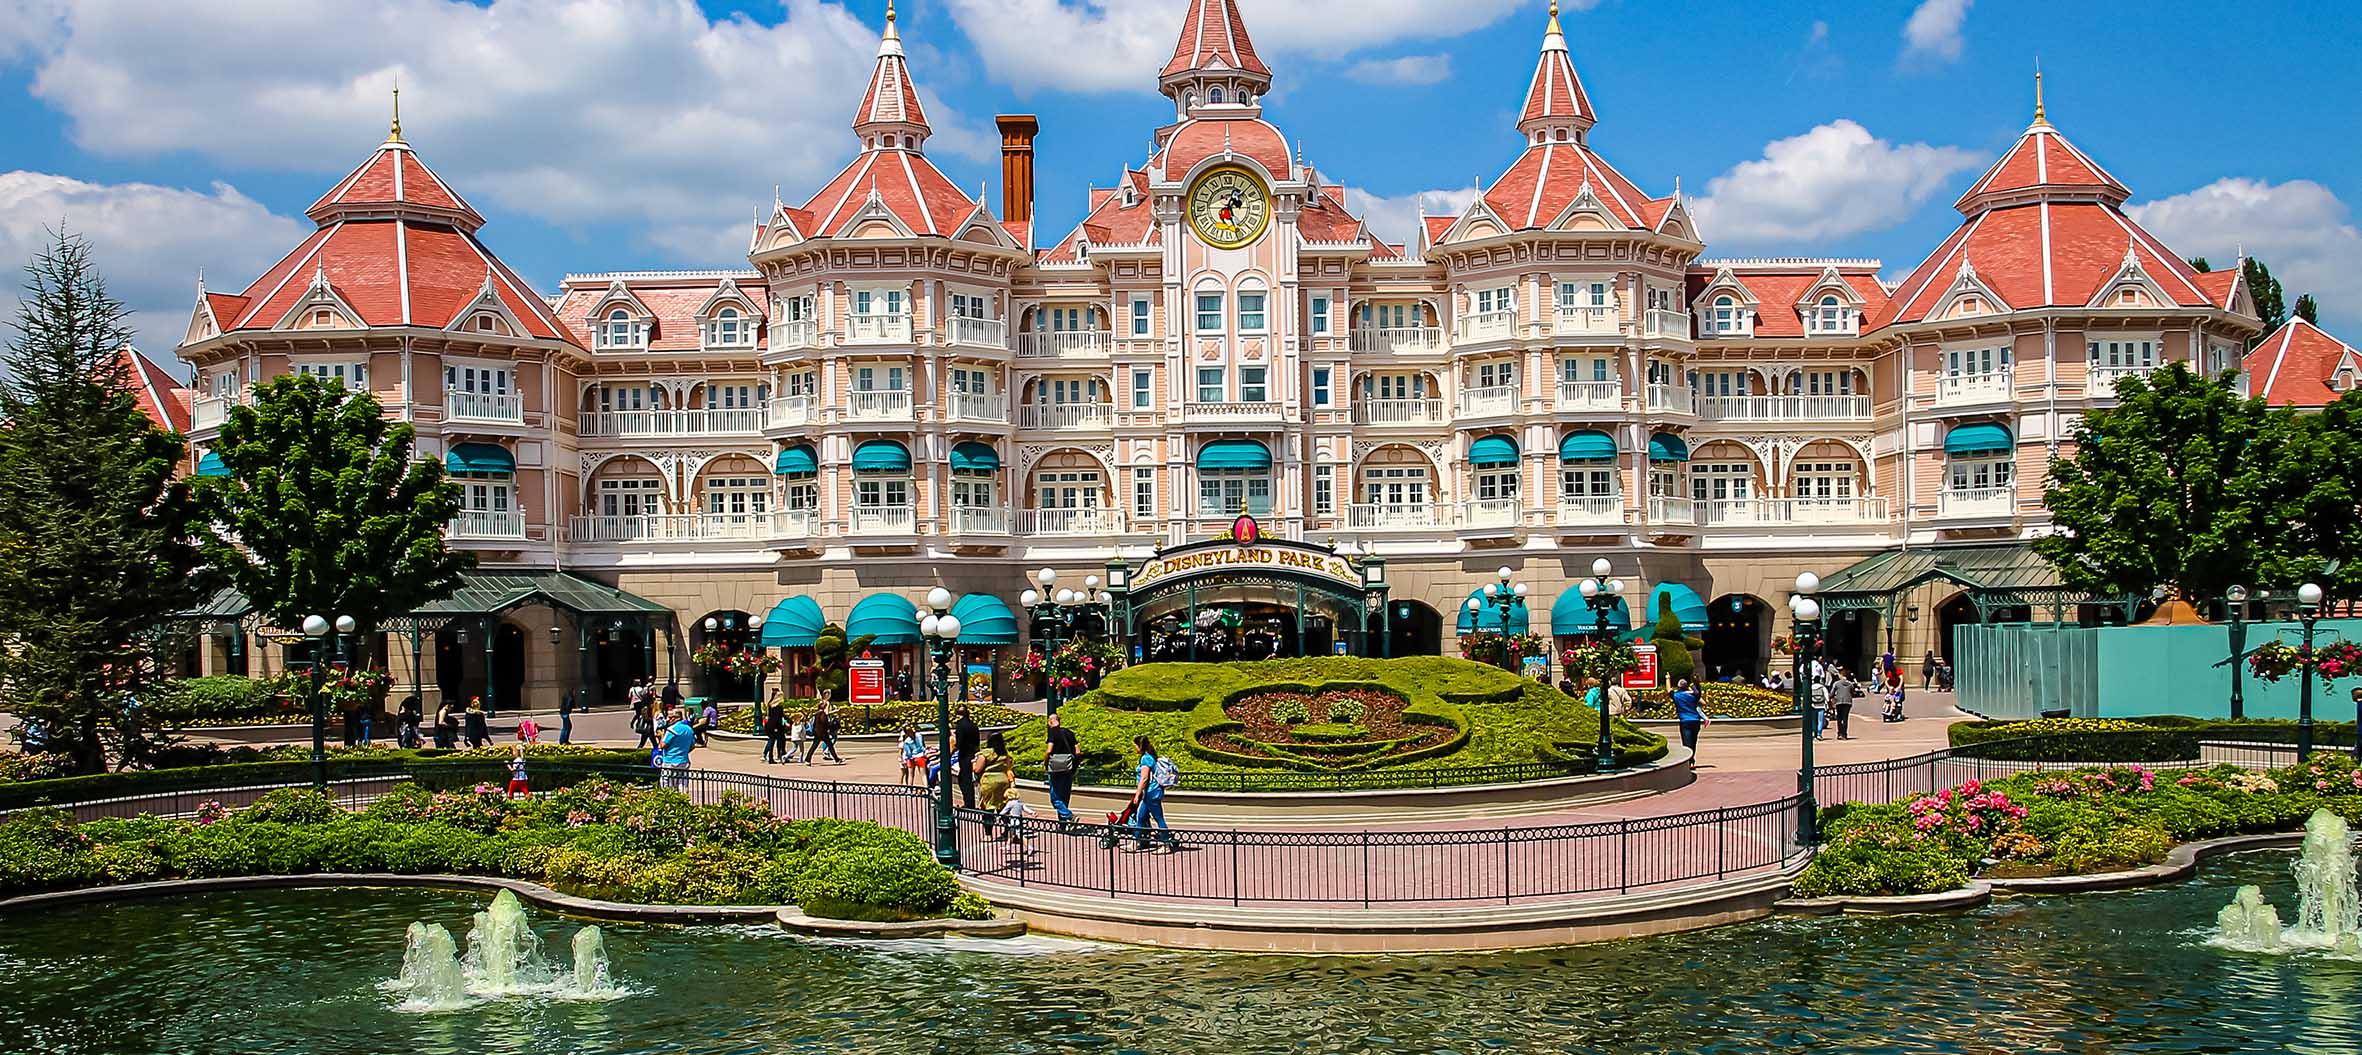 Stay UpToDate And Learn All About DVC Maintenance Fees In 2023